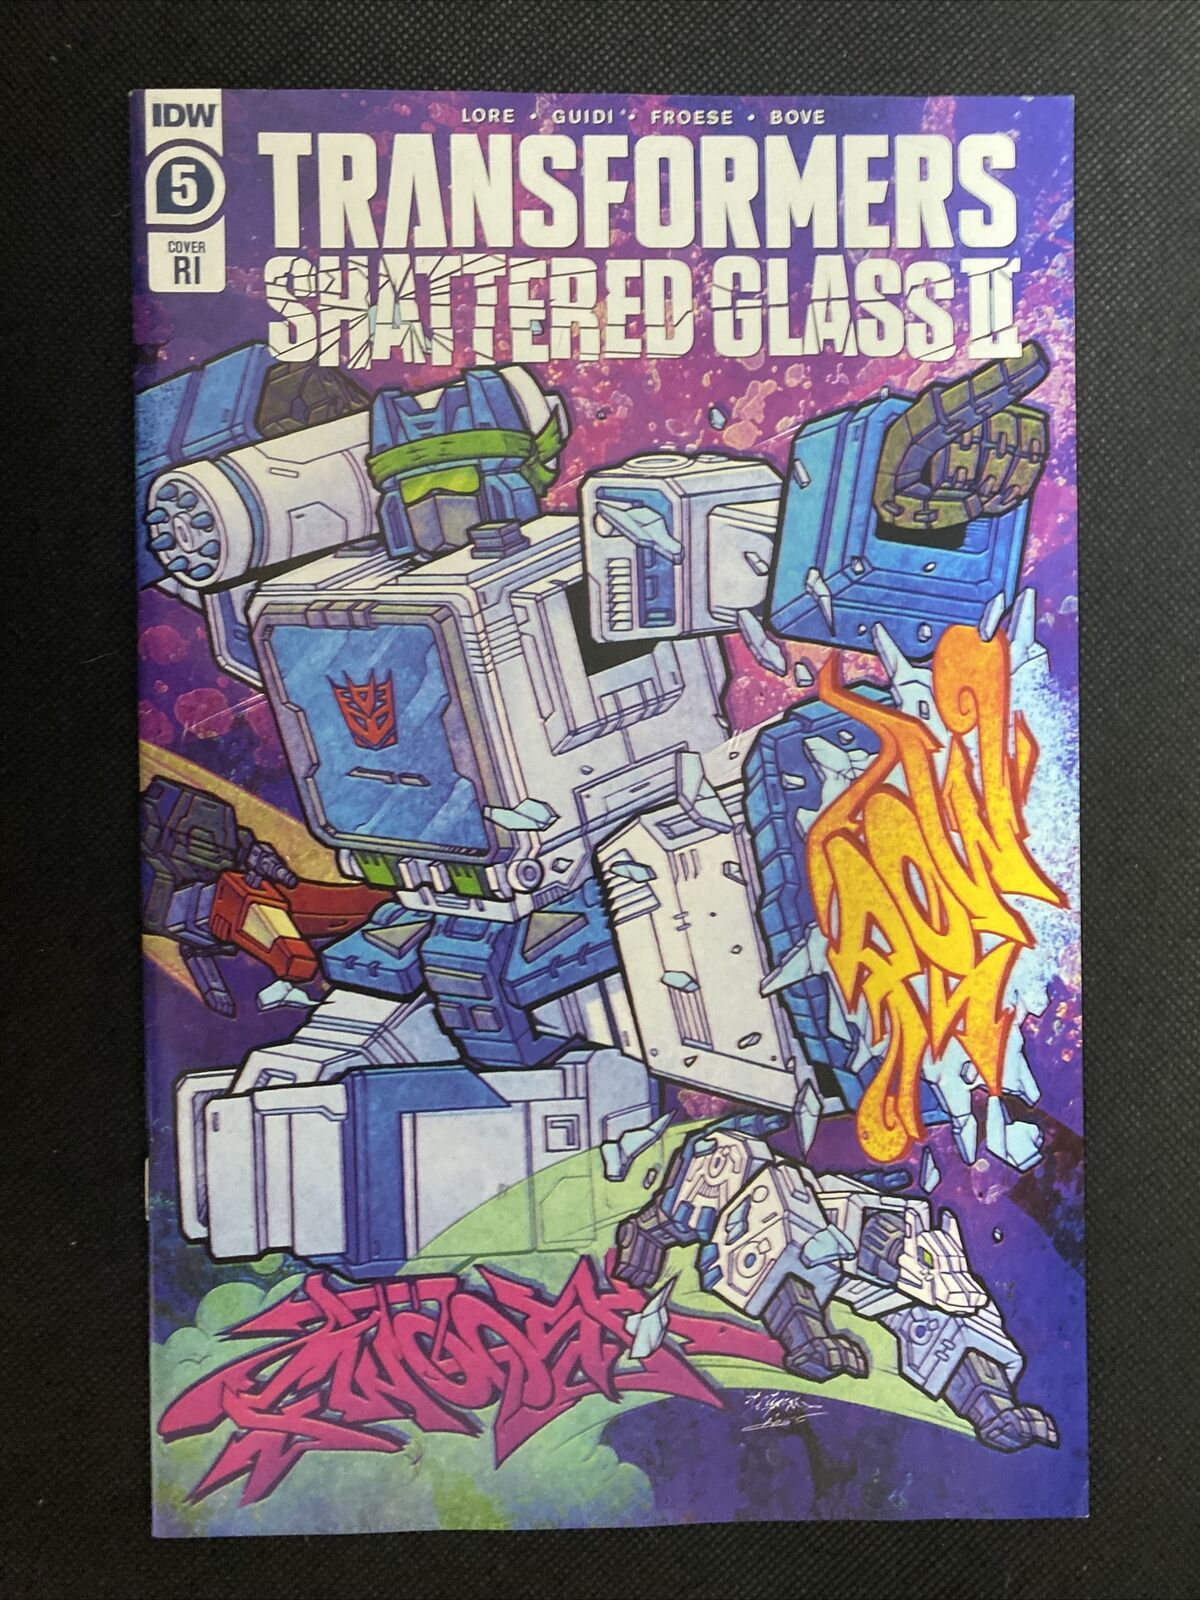 Transformers Shattered Glass II #5 (IDW 2022)  1:10 Ratio Variant